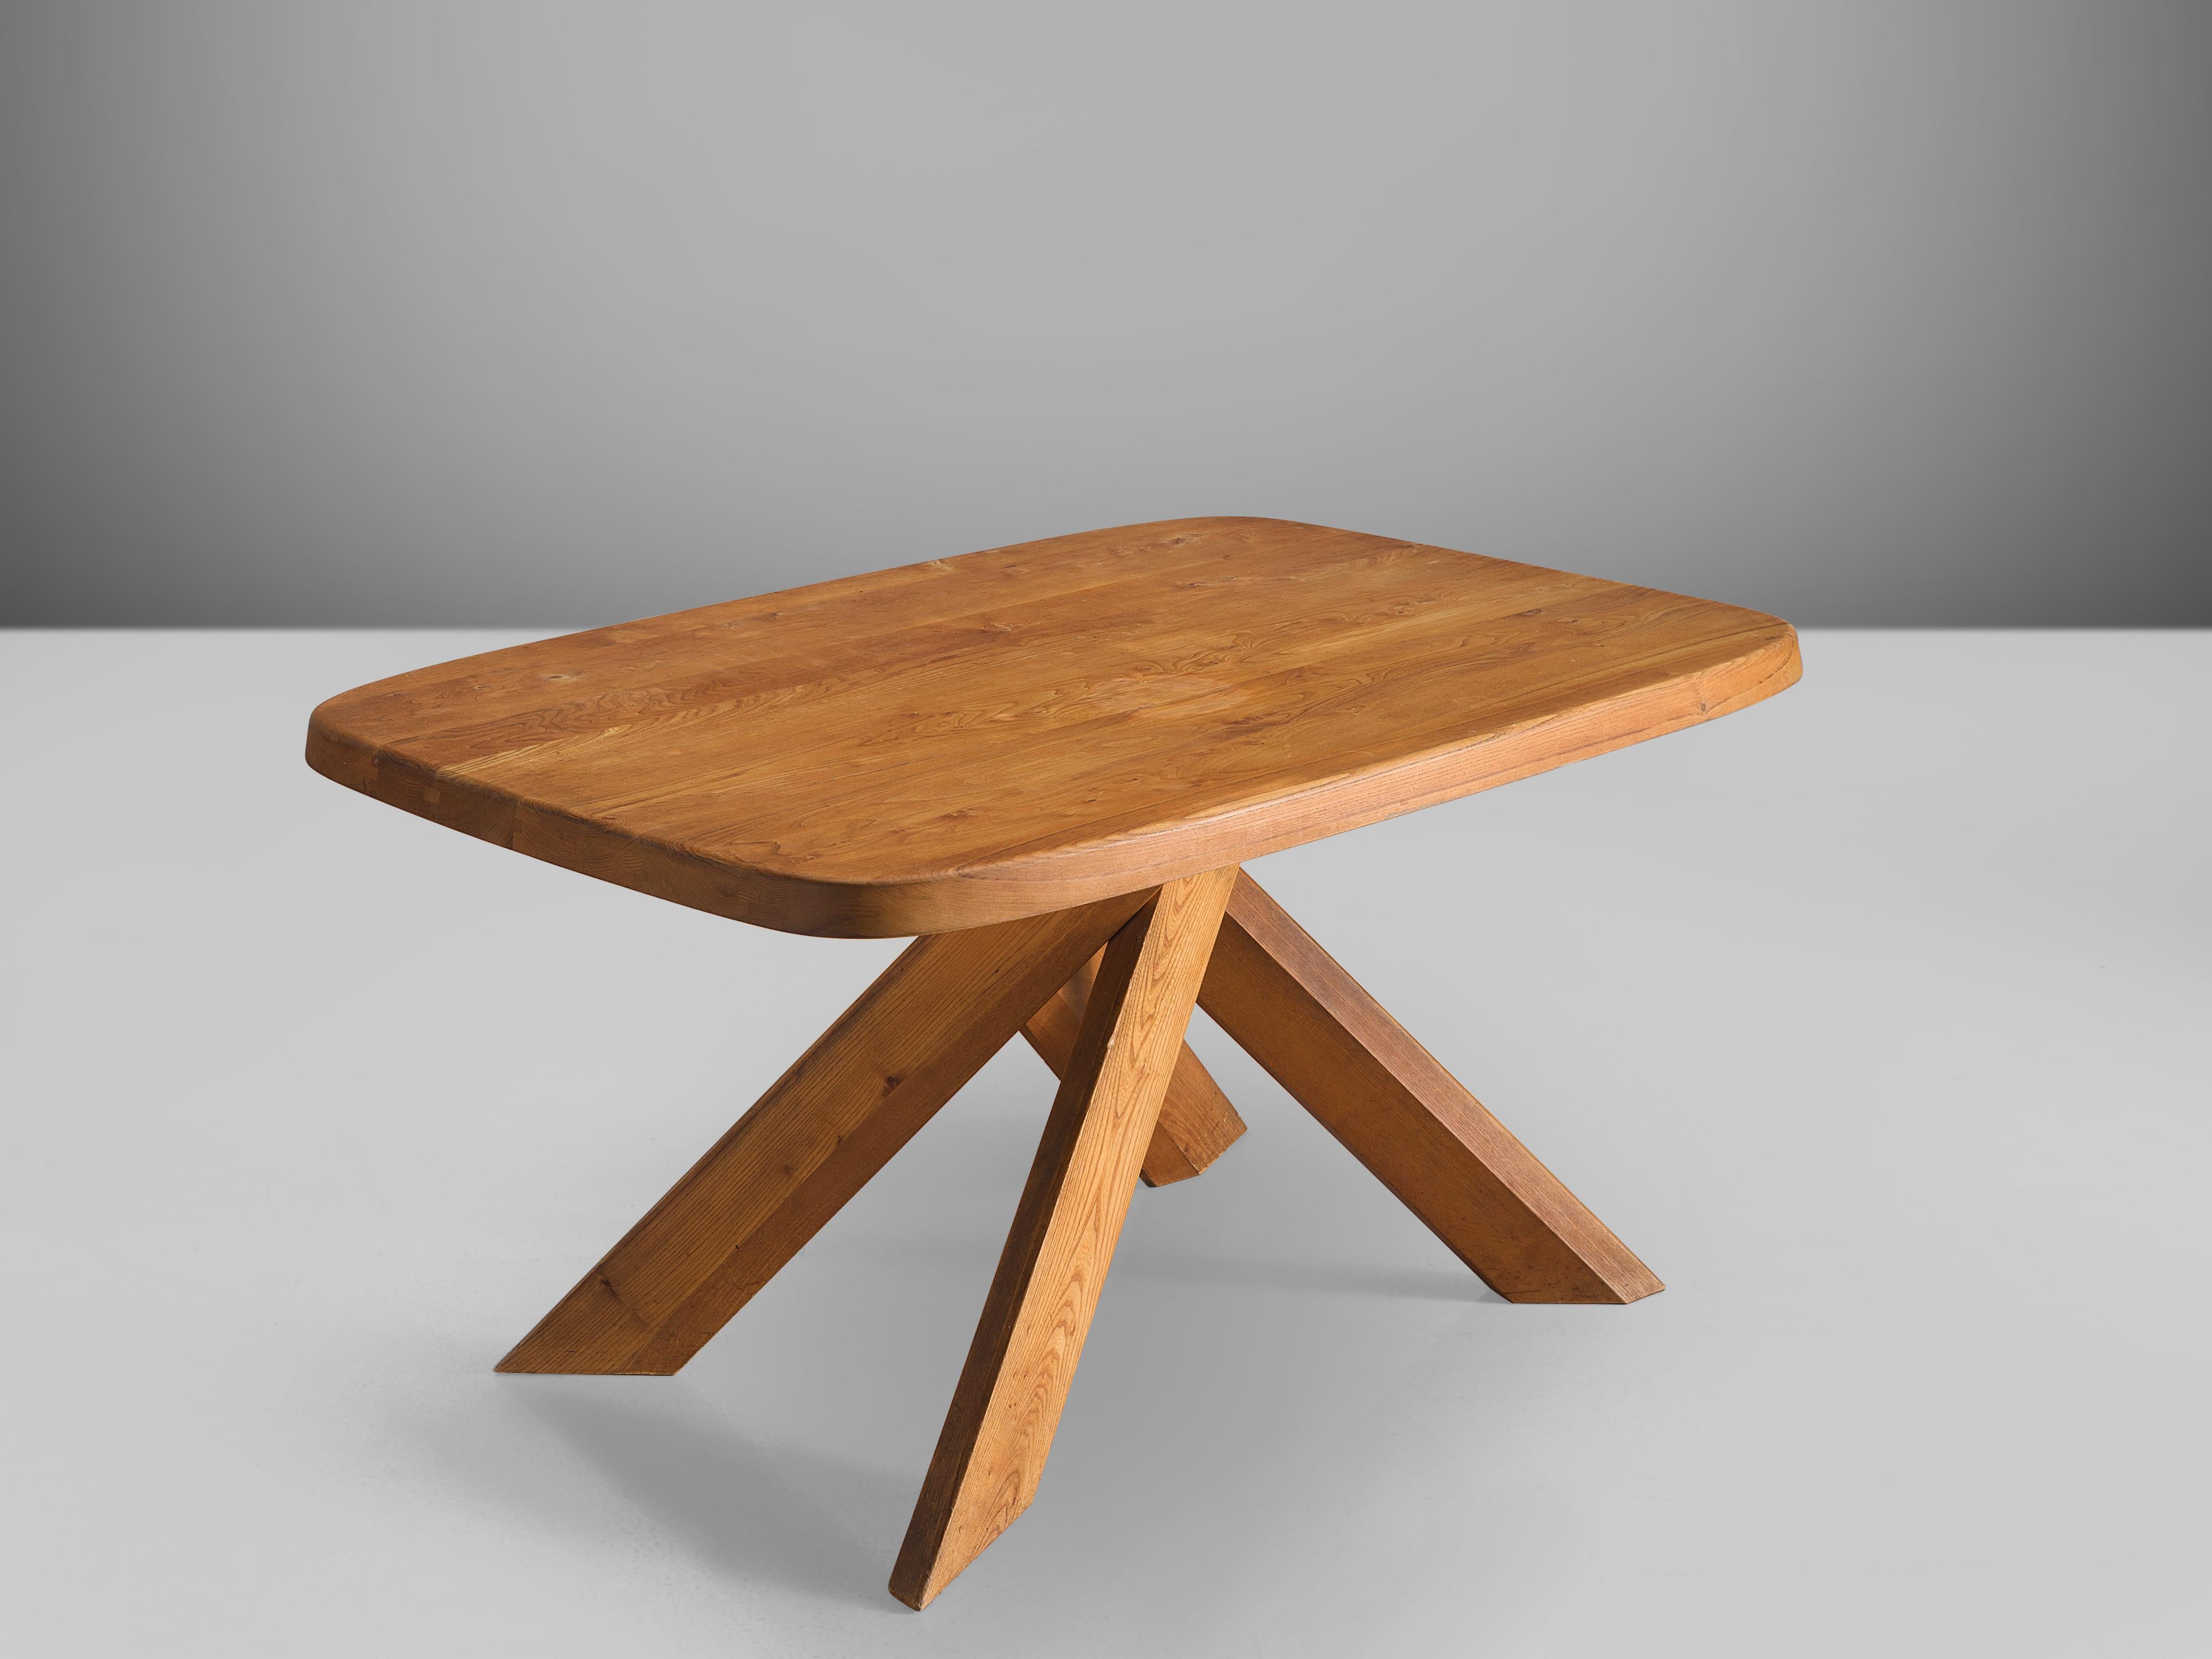 Pierre Chapo, 'Aban' dining table T35B, elm, France, 1960s

This small dining or writing table in solid elm is designed by master woodworker Pierre Chapo. The basic design and construction as well as the use of solid elm wood characterizes the work